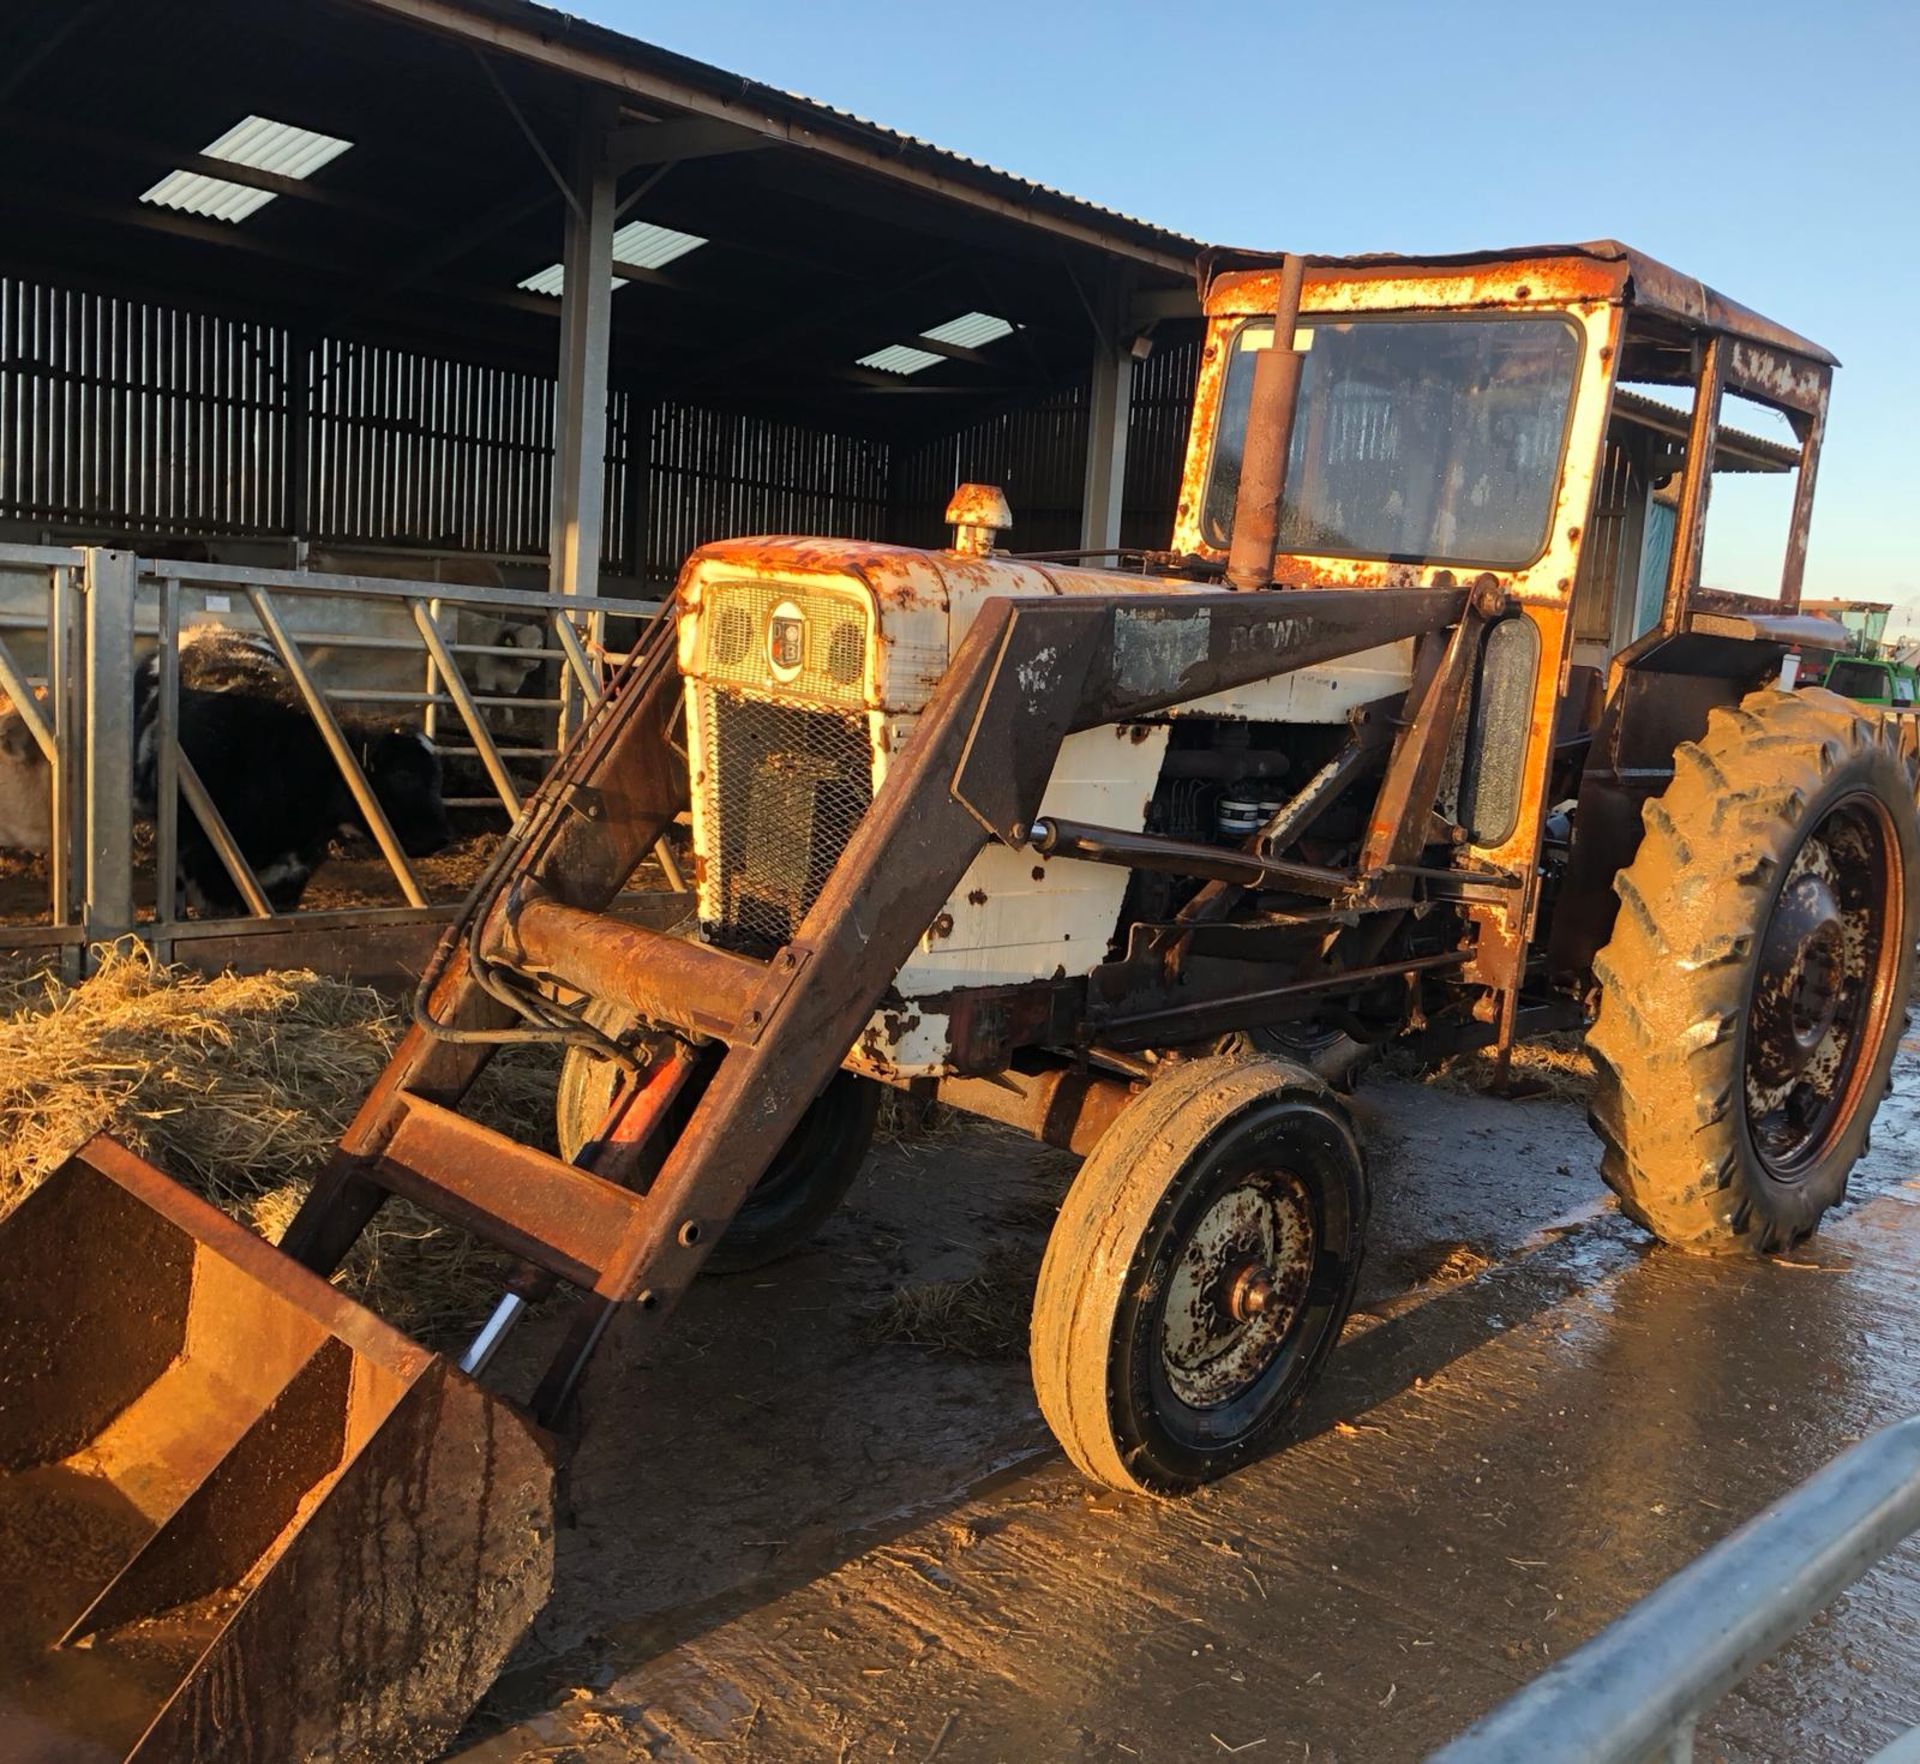 1971 DAVID BROWN 1200 TRACTOR, STARTS WITH A JUMP PACK, DRIVES AND LIFTS *PLUS VAT* - Bild 6 aus 16